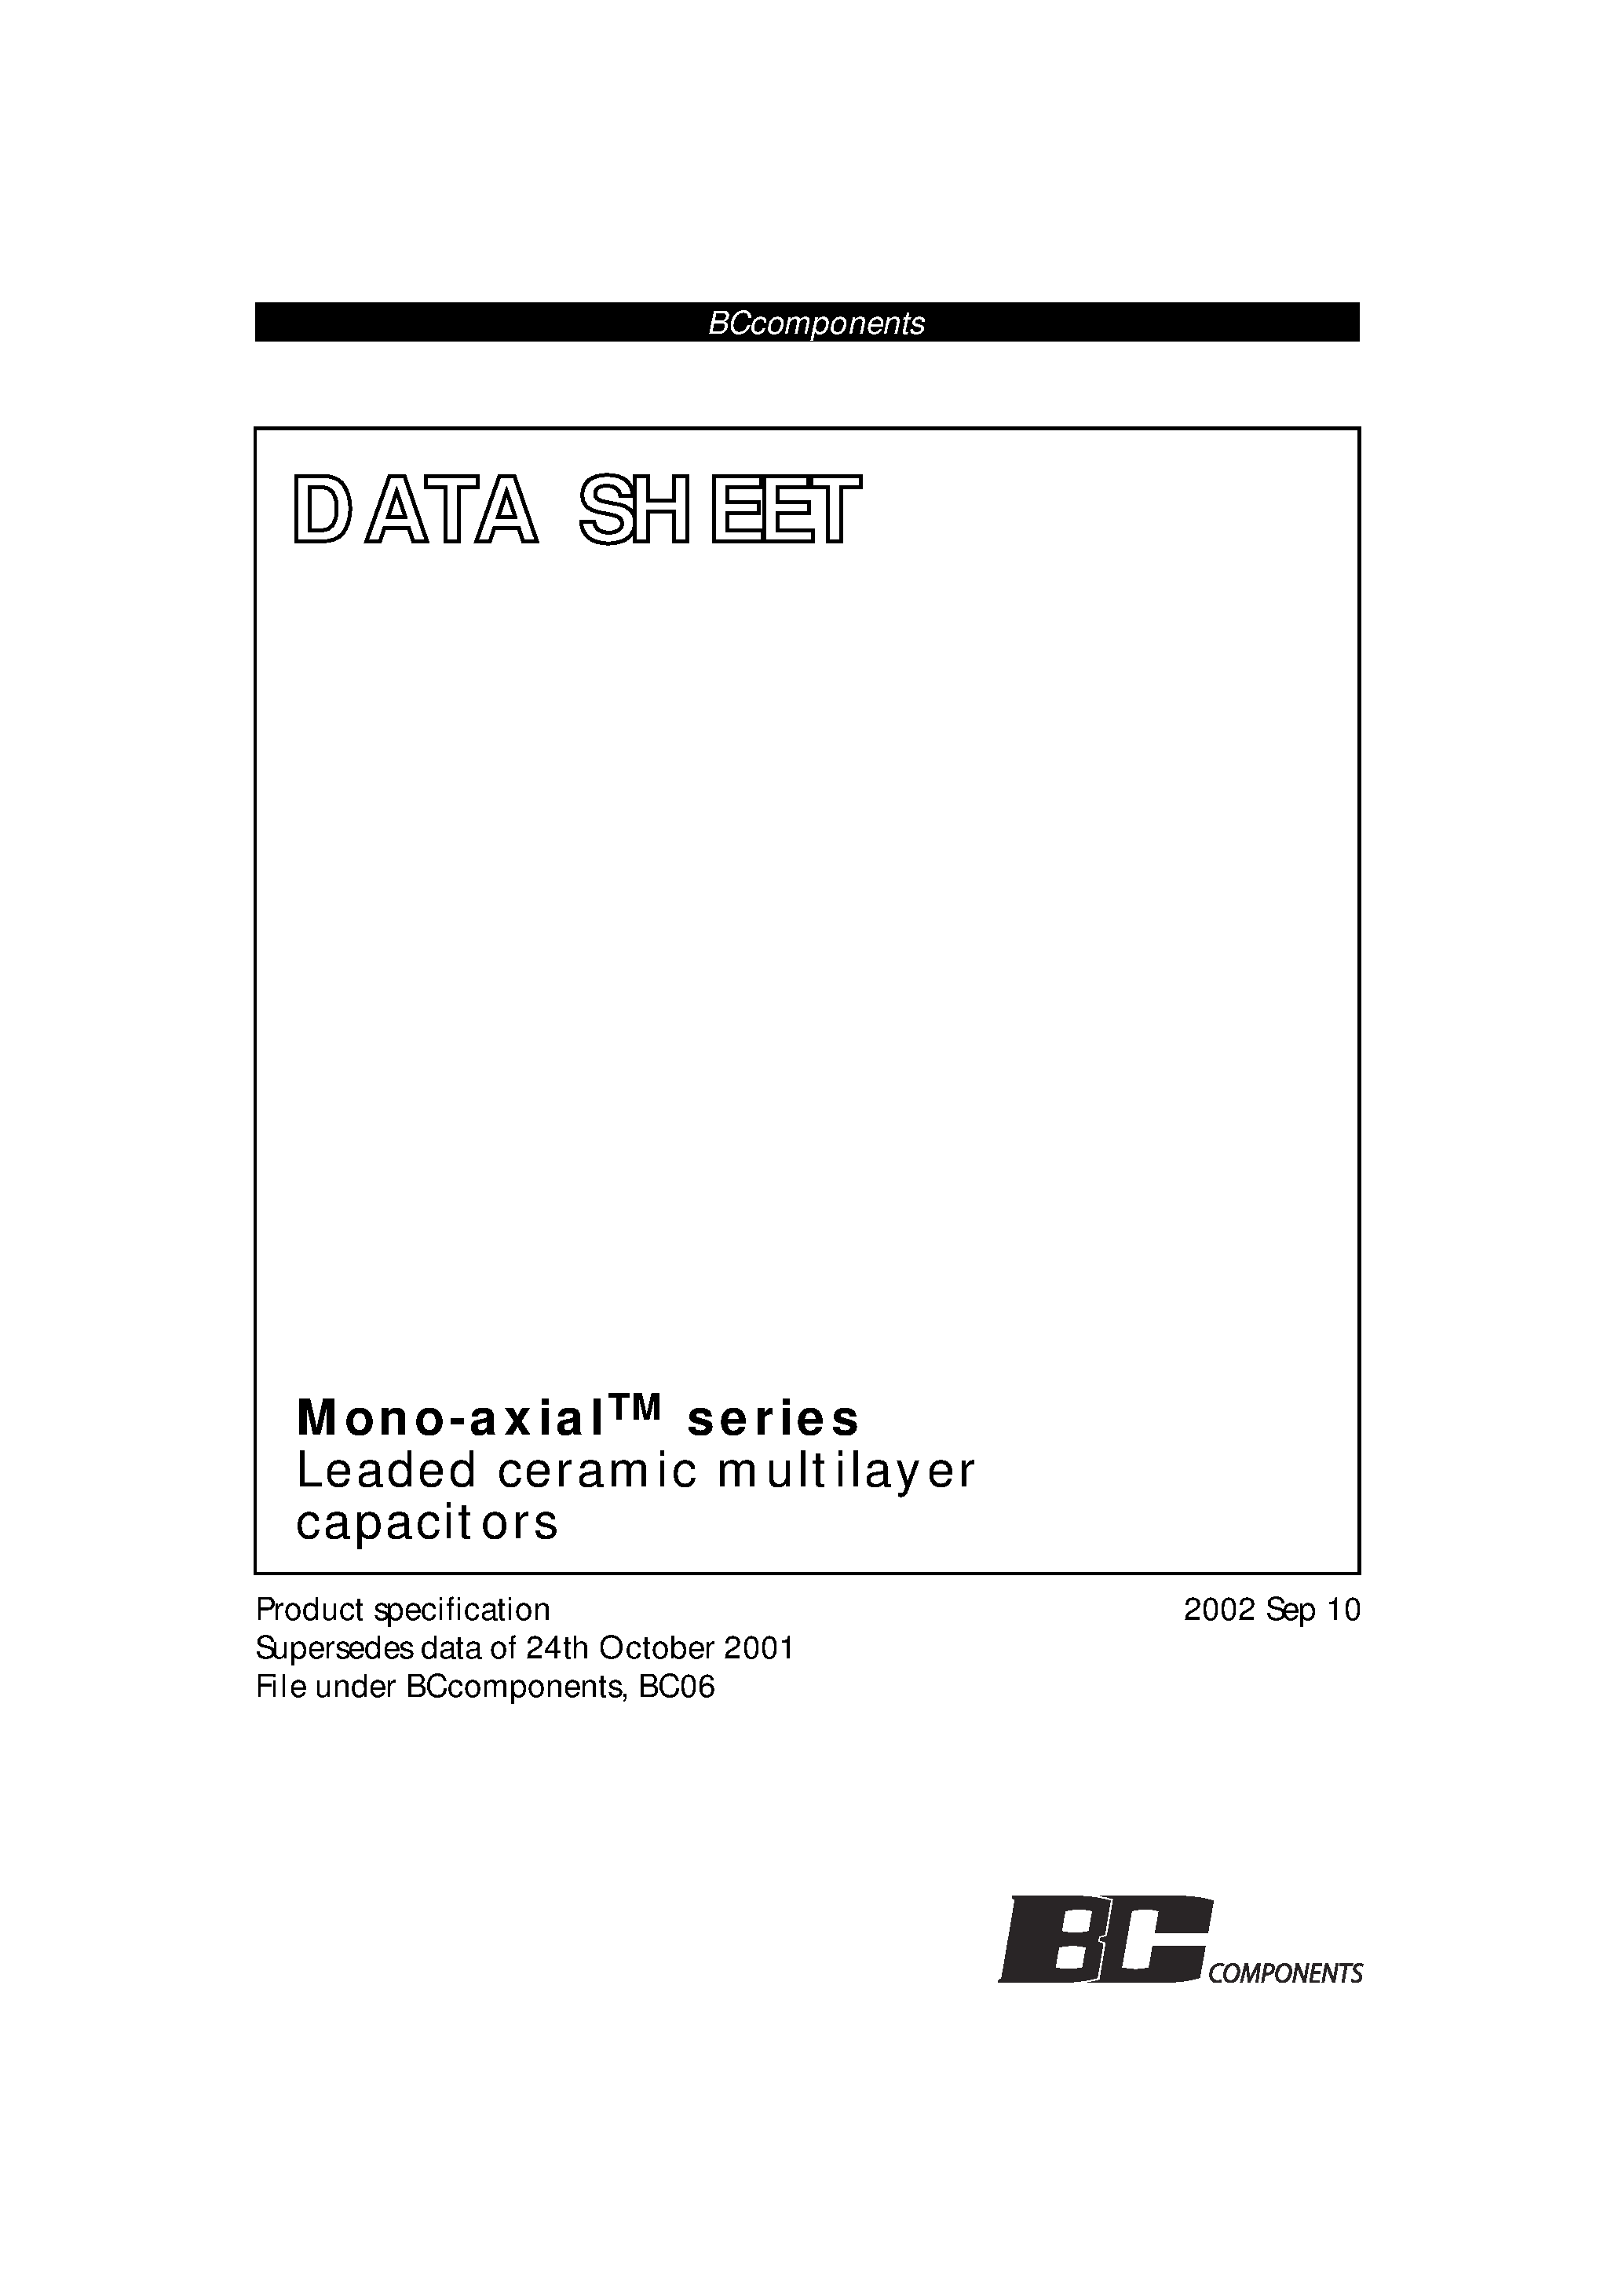 Datasheet A562J20C0GF5 - Mono-Axial Series / Leaded Ceramic Multilayer Capacitors page 1